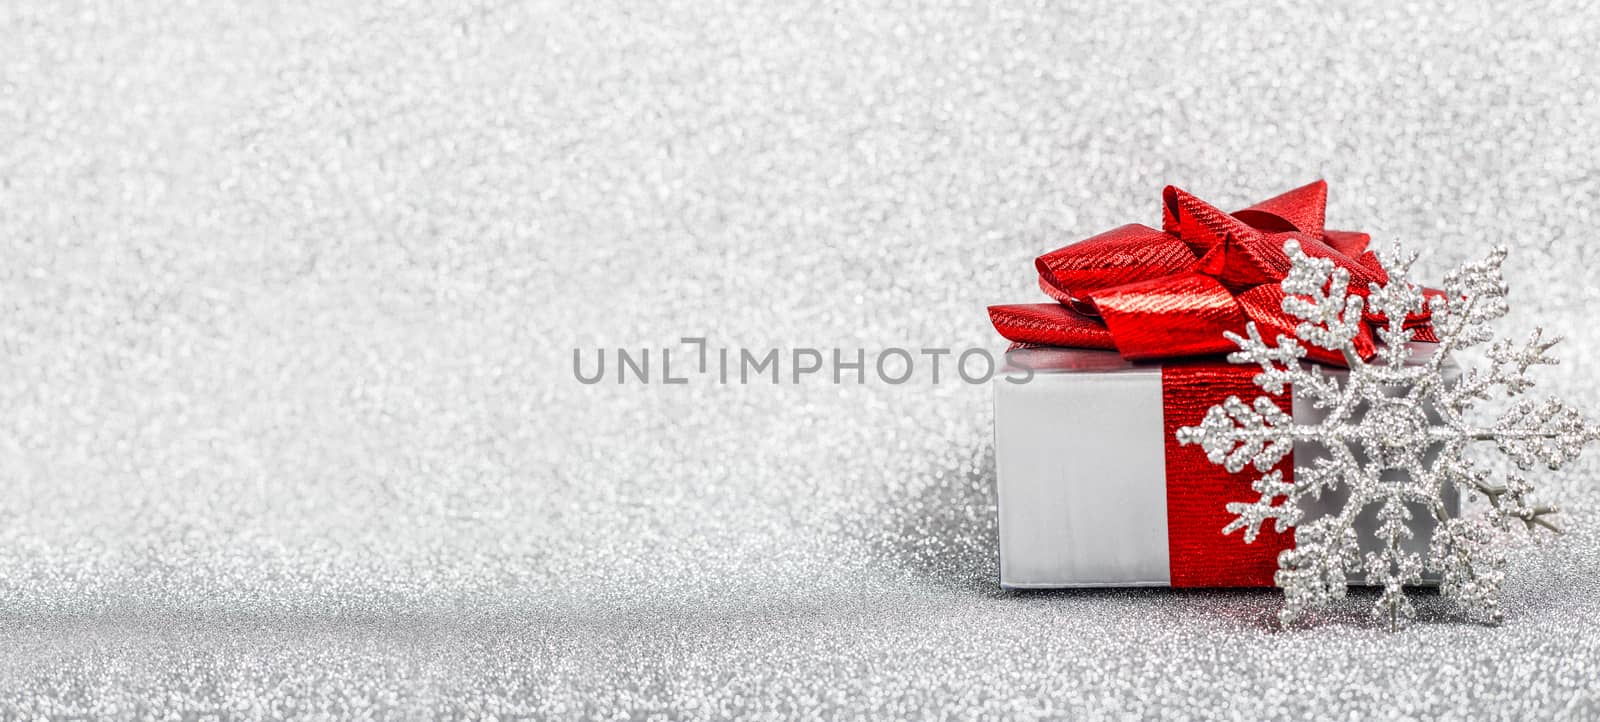 Christmas holiday composition of festive decor gift box with red ribbon on silver glitter bokeh background